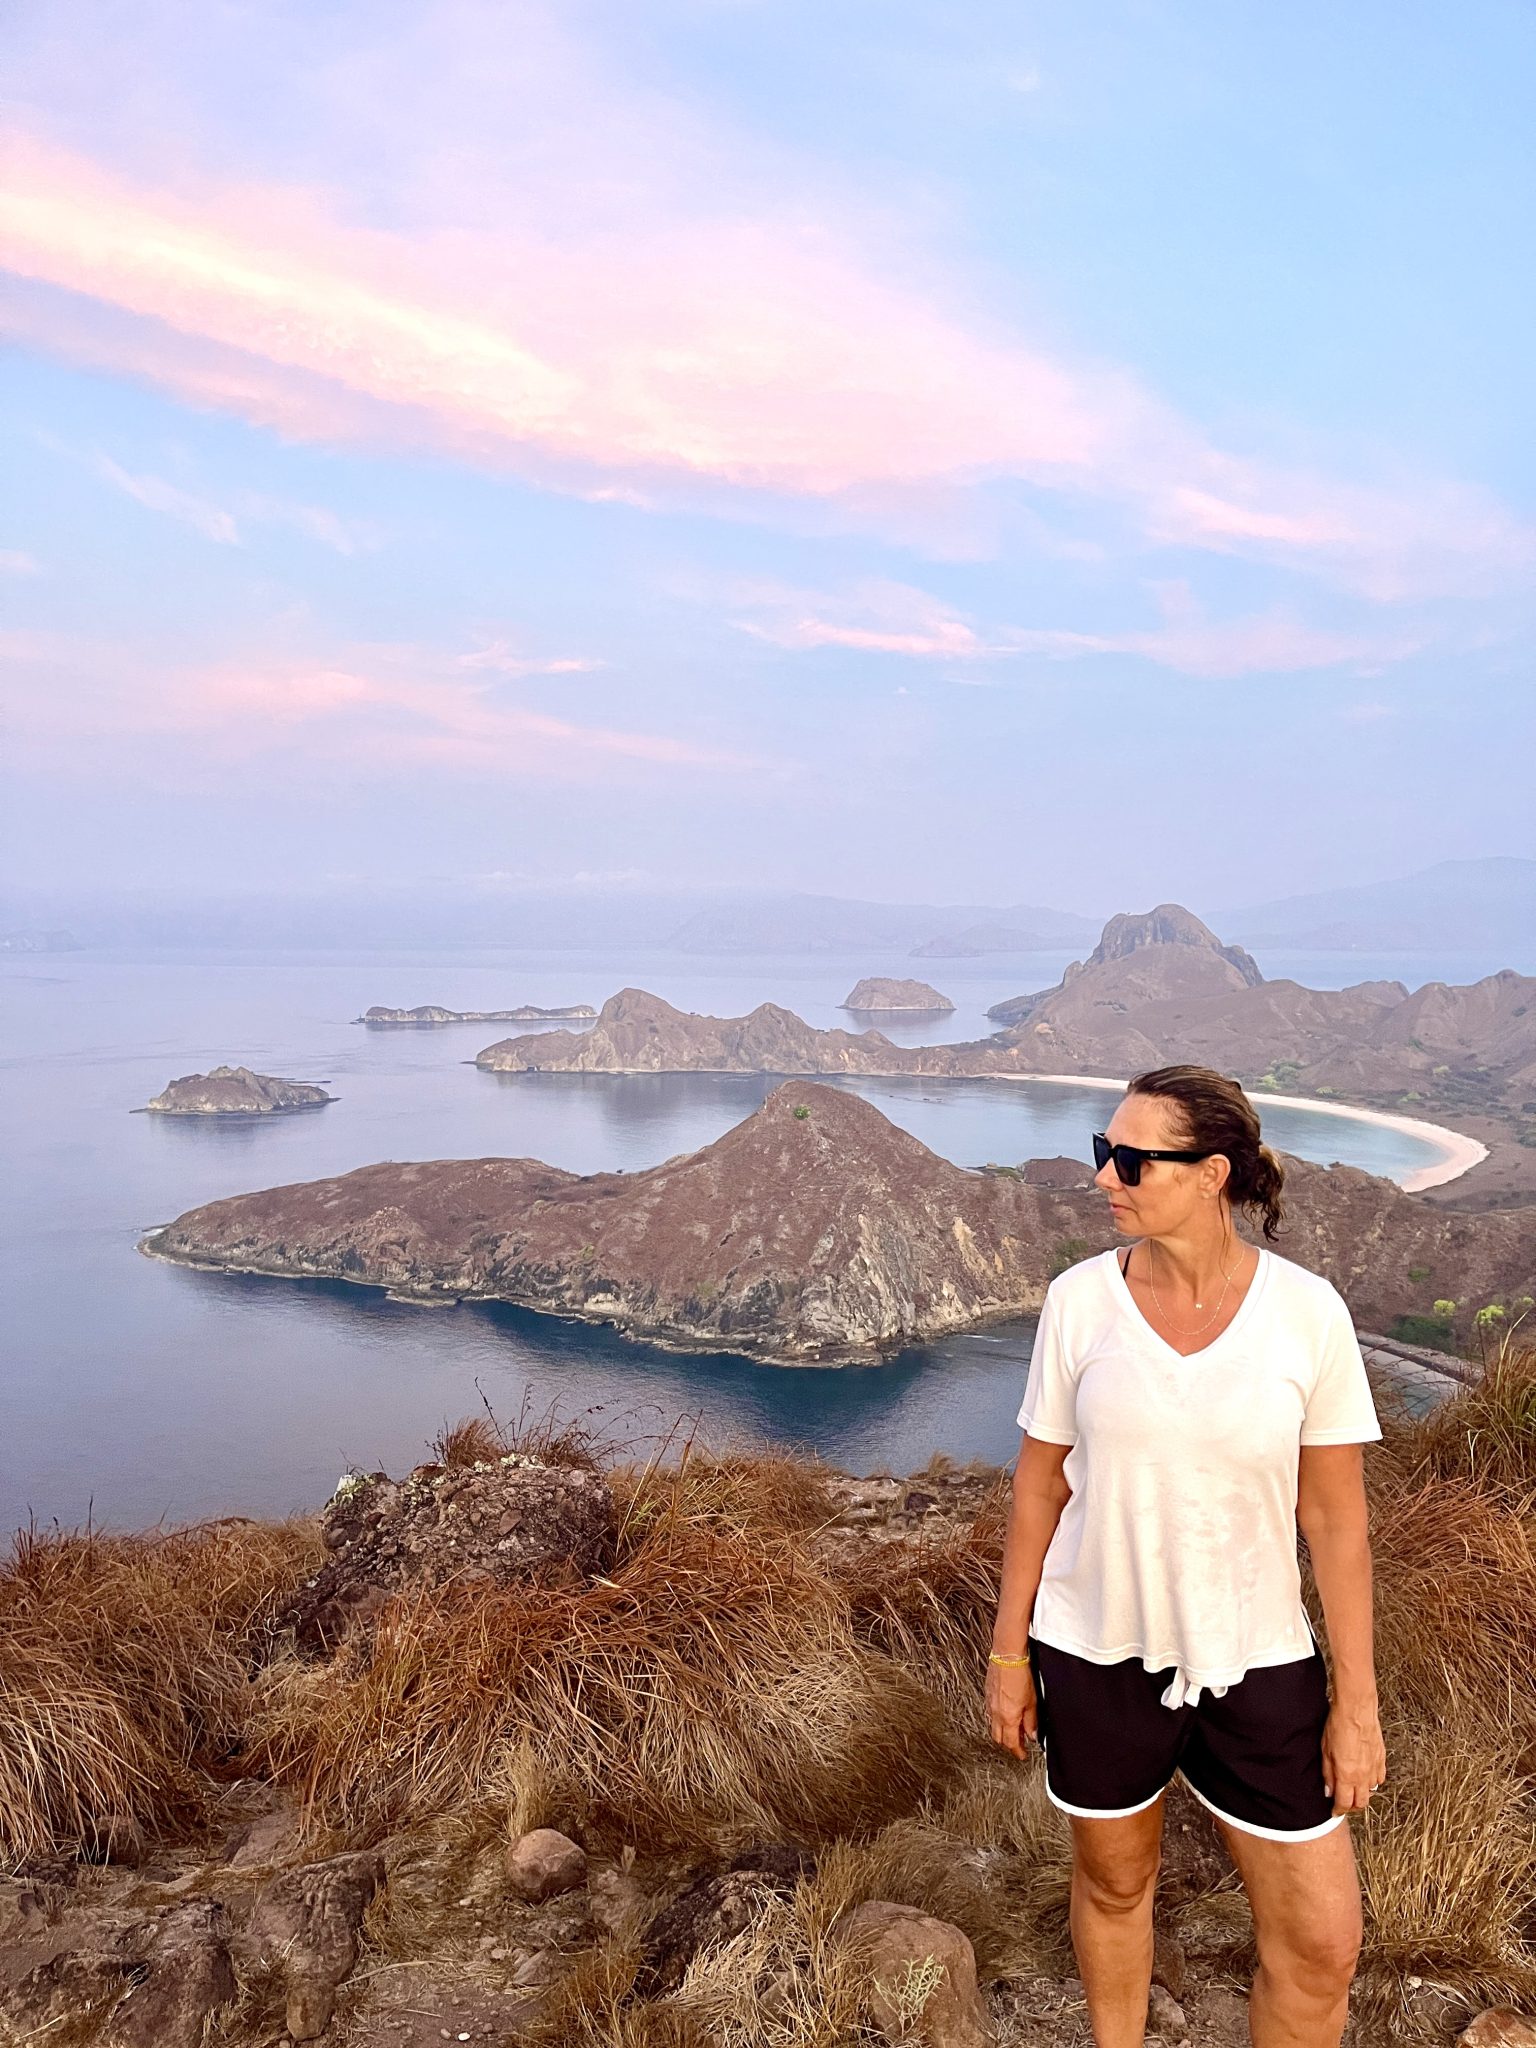 sunrise on Padar island - you can see white, black and pink sand beaches from one spot